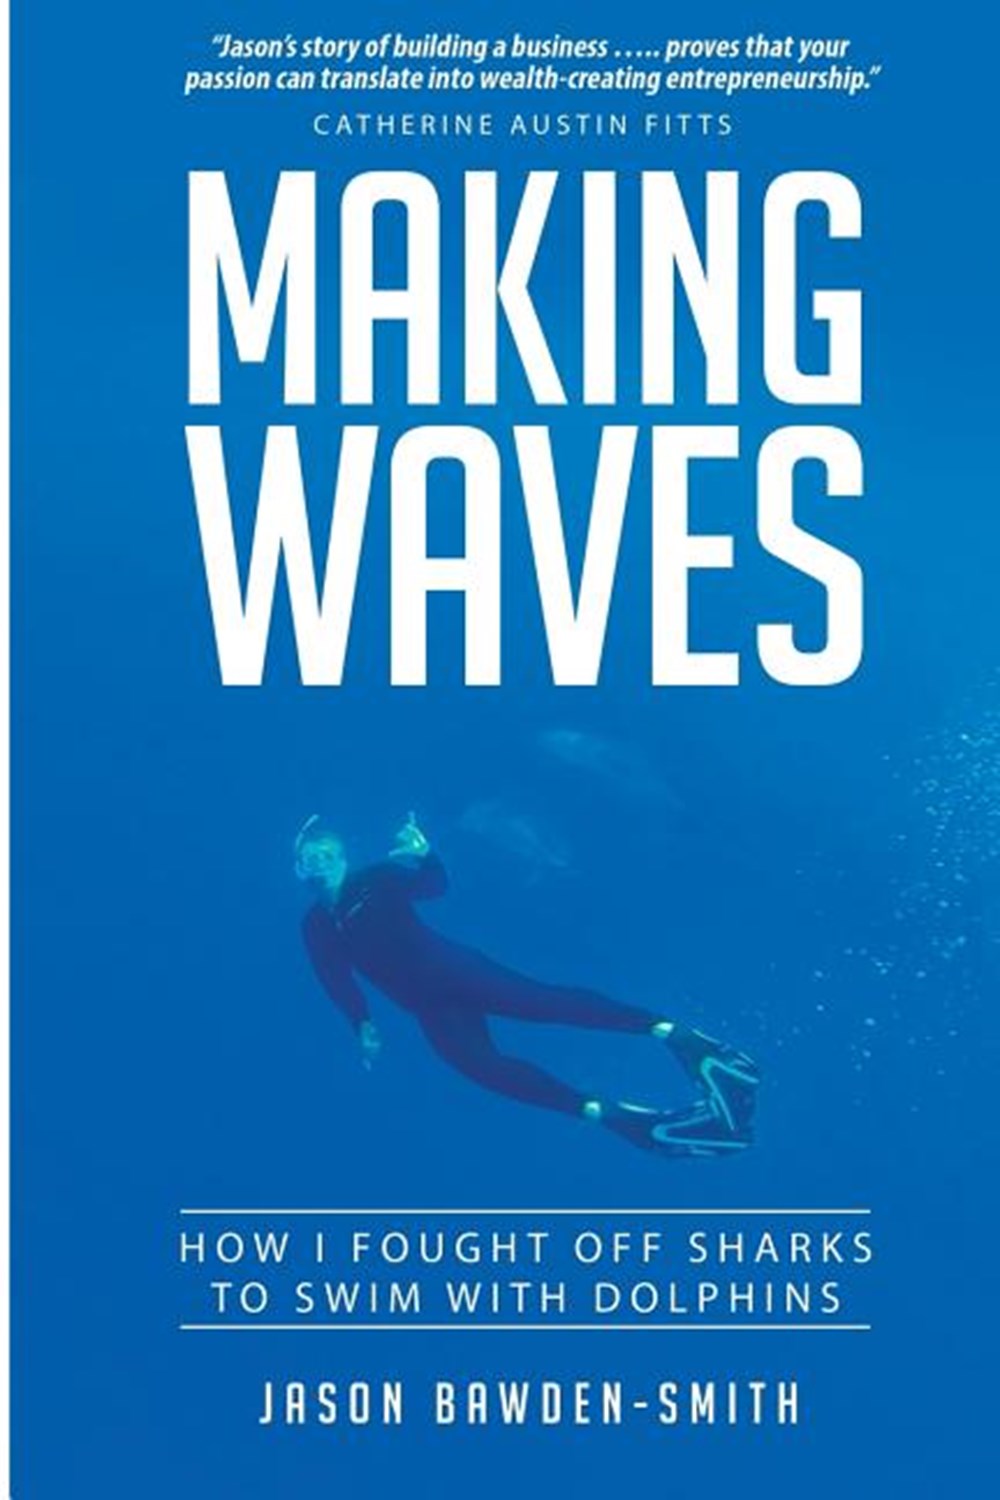 Making Waves How I fought off dolphins to swim with sharks